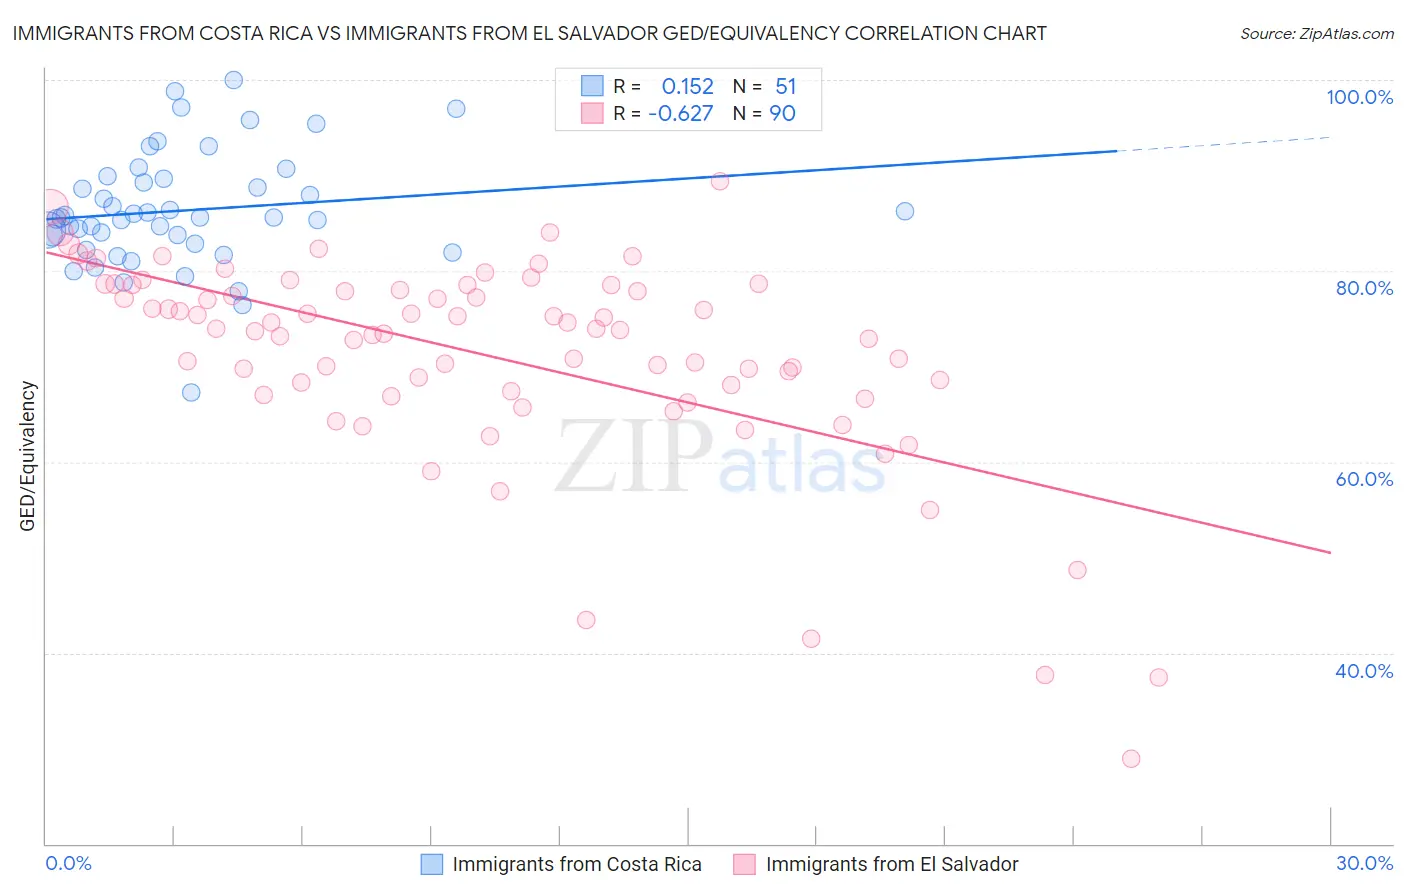 Immigrants from Costa Rica vs Immigrants from El Salvador GED/Equivalency